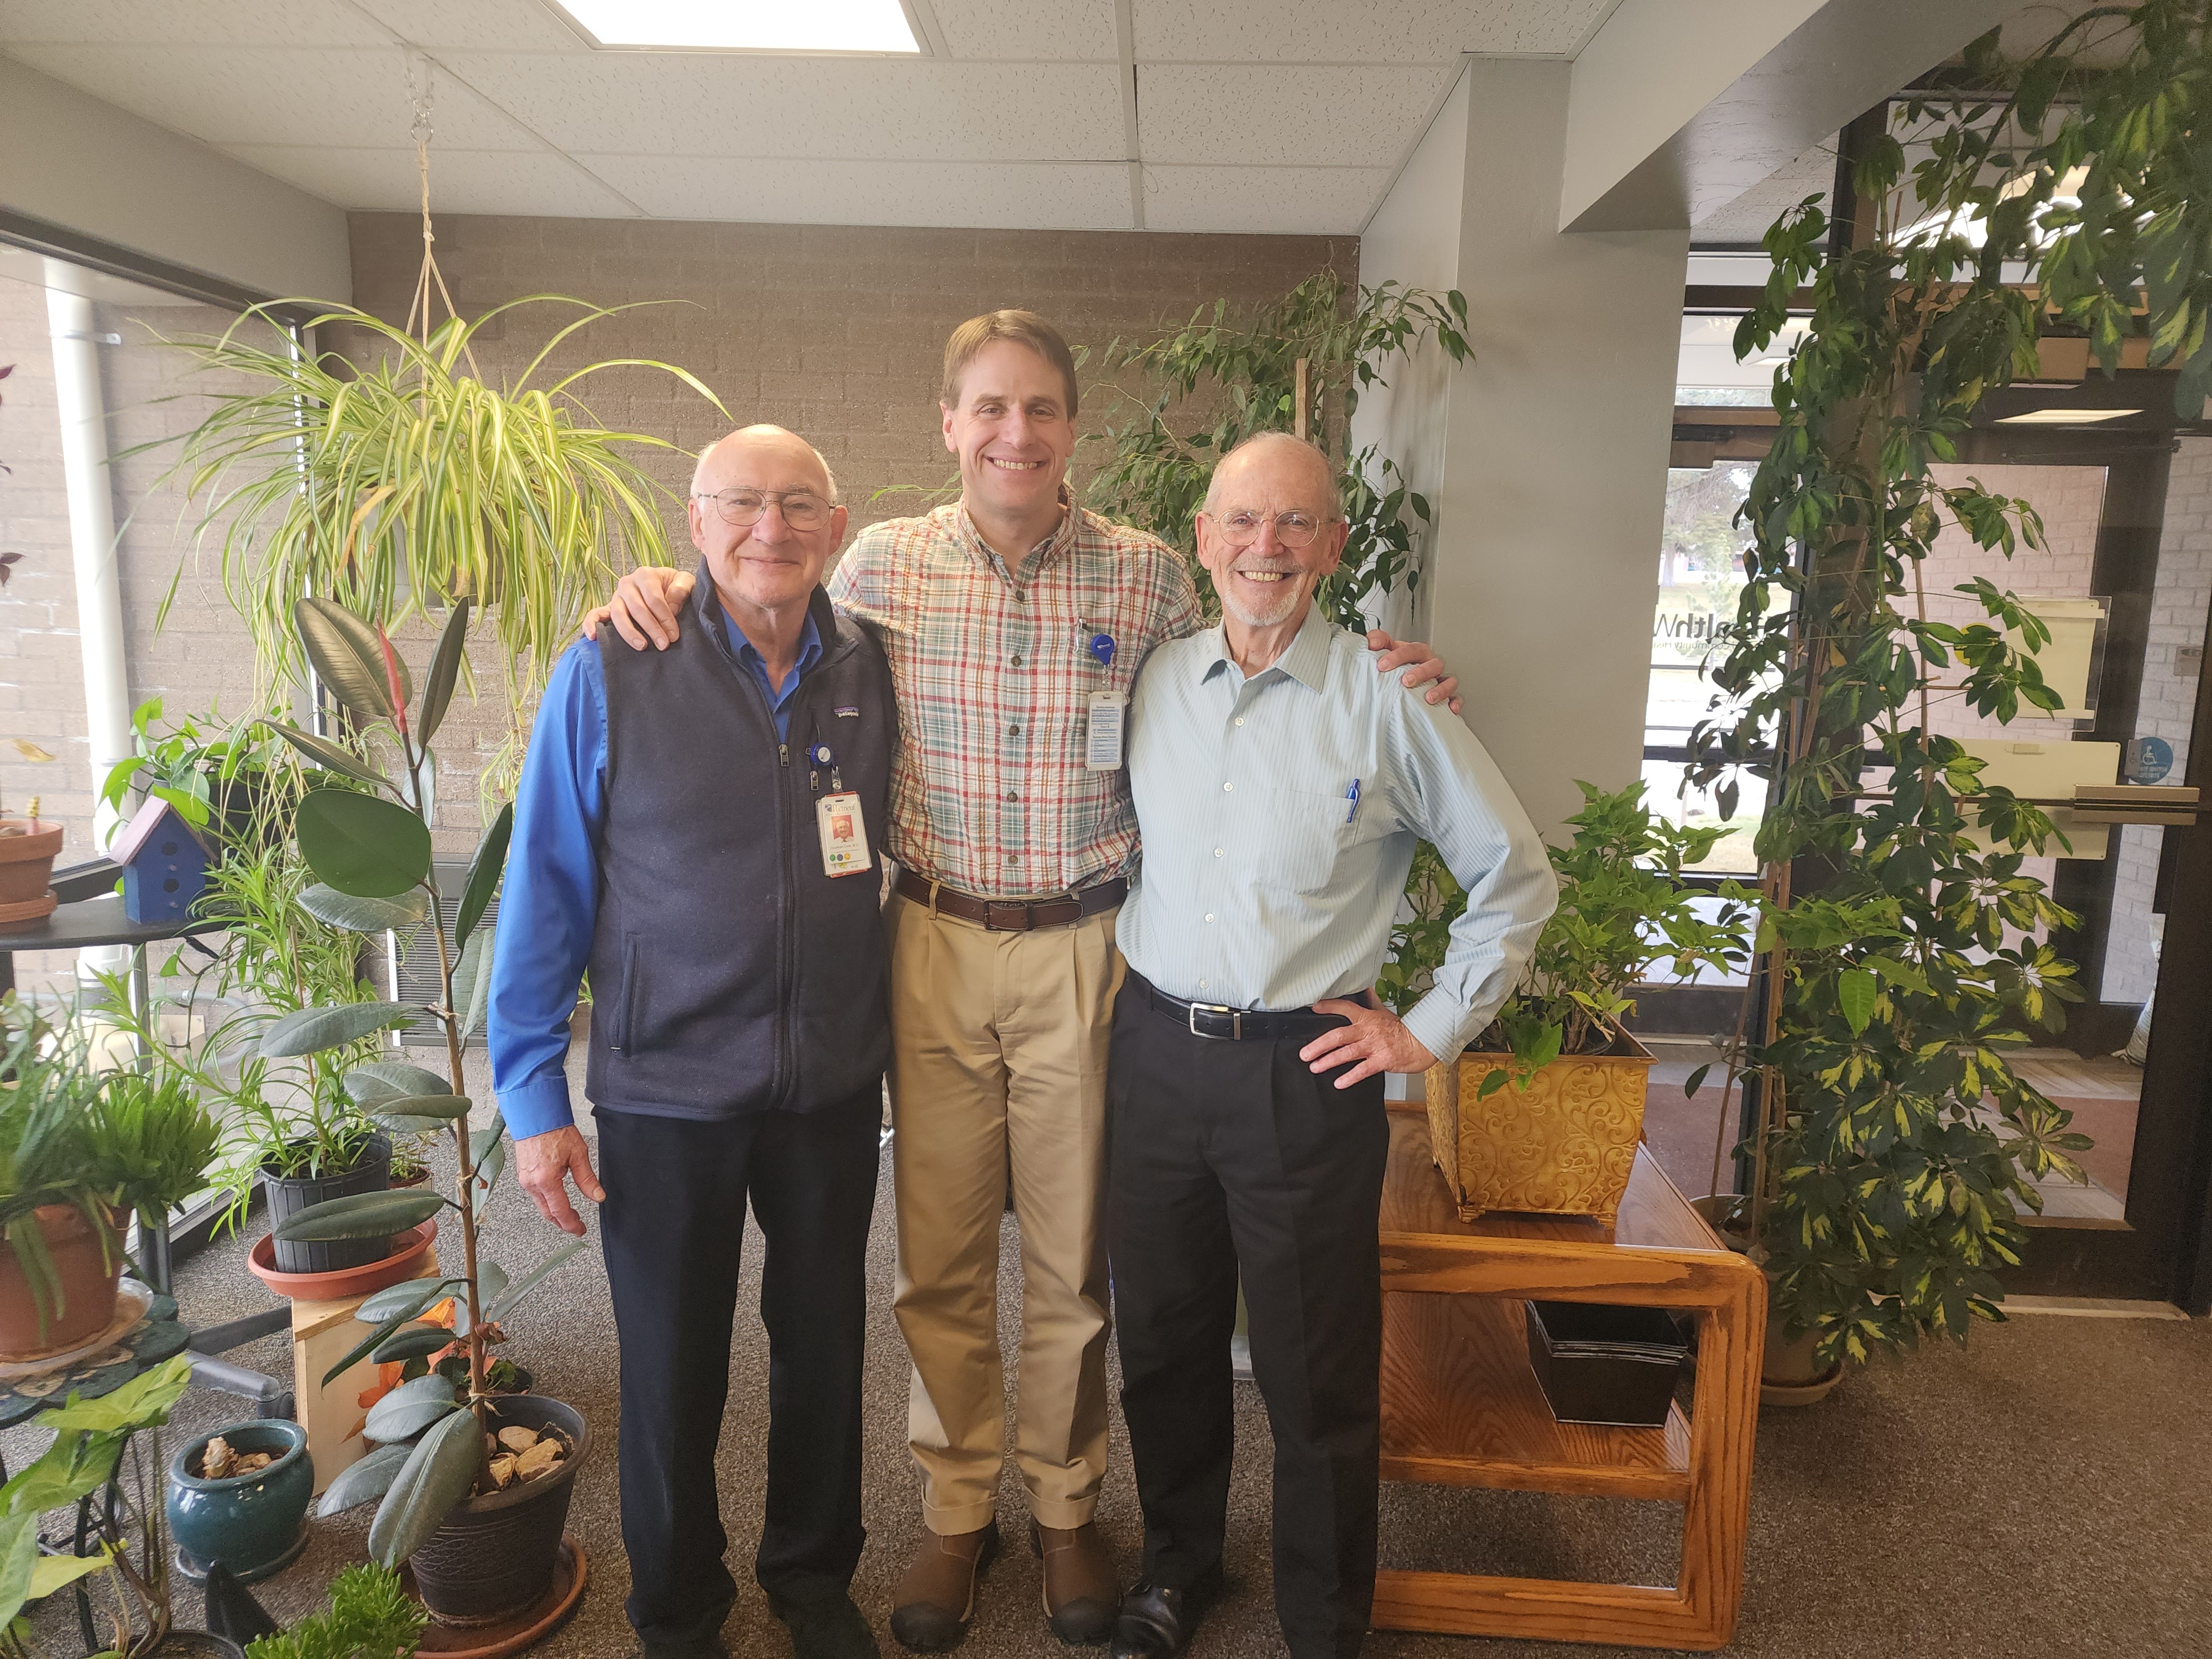 Dr. Cree, Dr. Ragan and Dr. Mickelsen at the ISU Family Medicine Residency